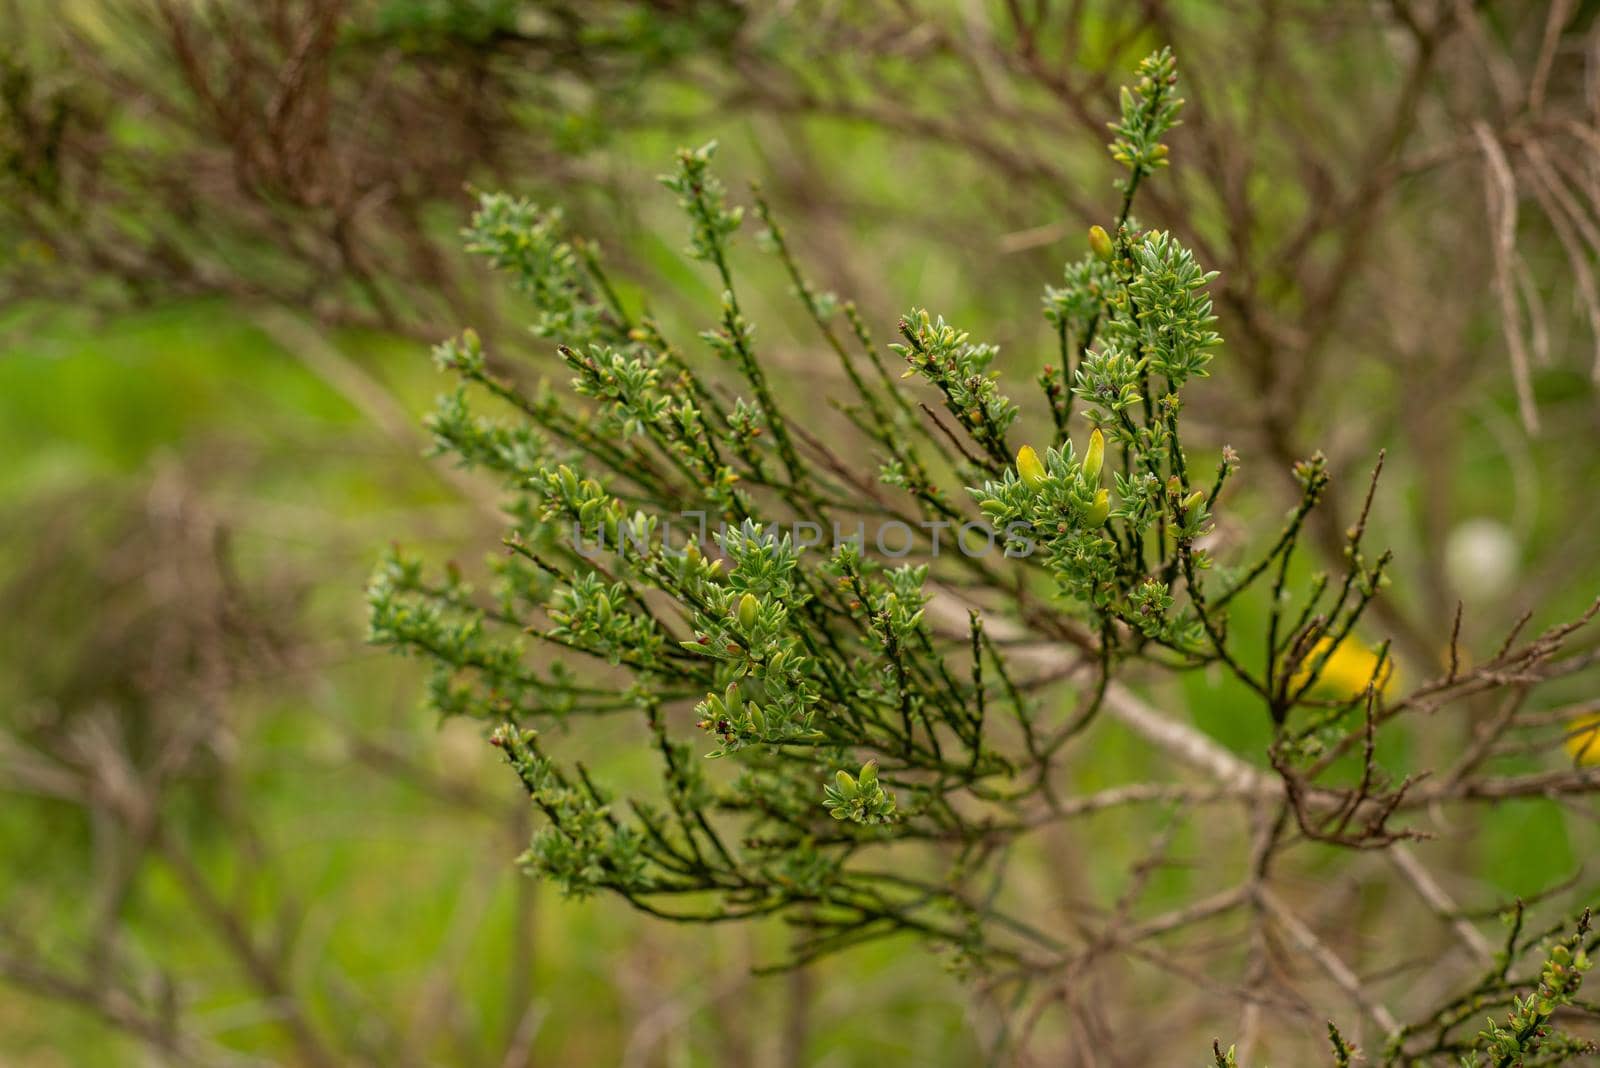 young unblown shoots of evergreen bushes in spring